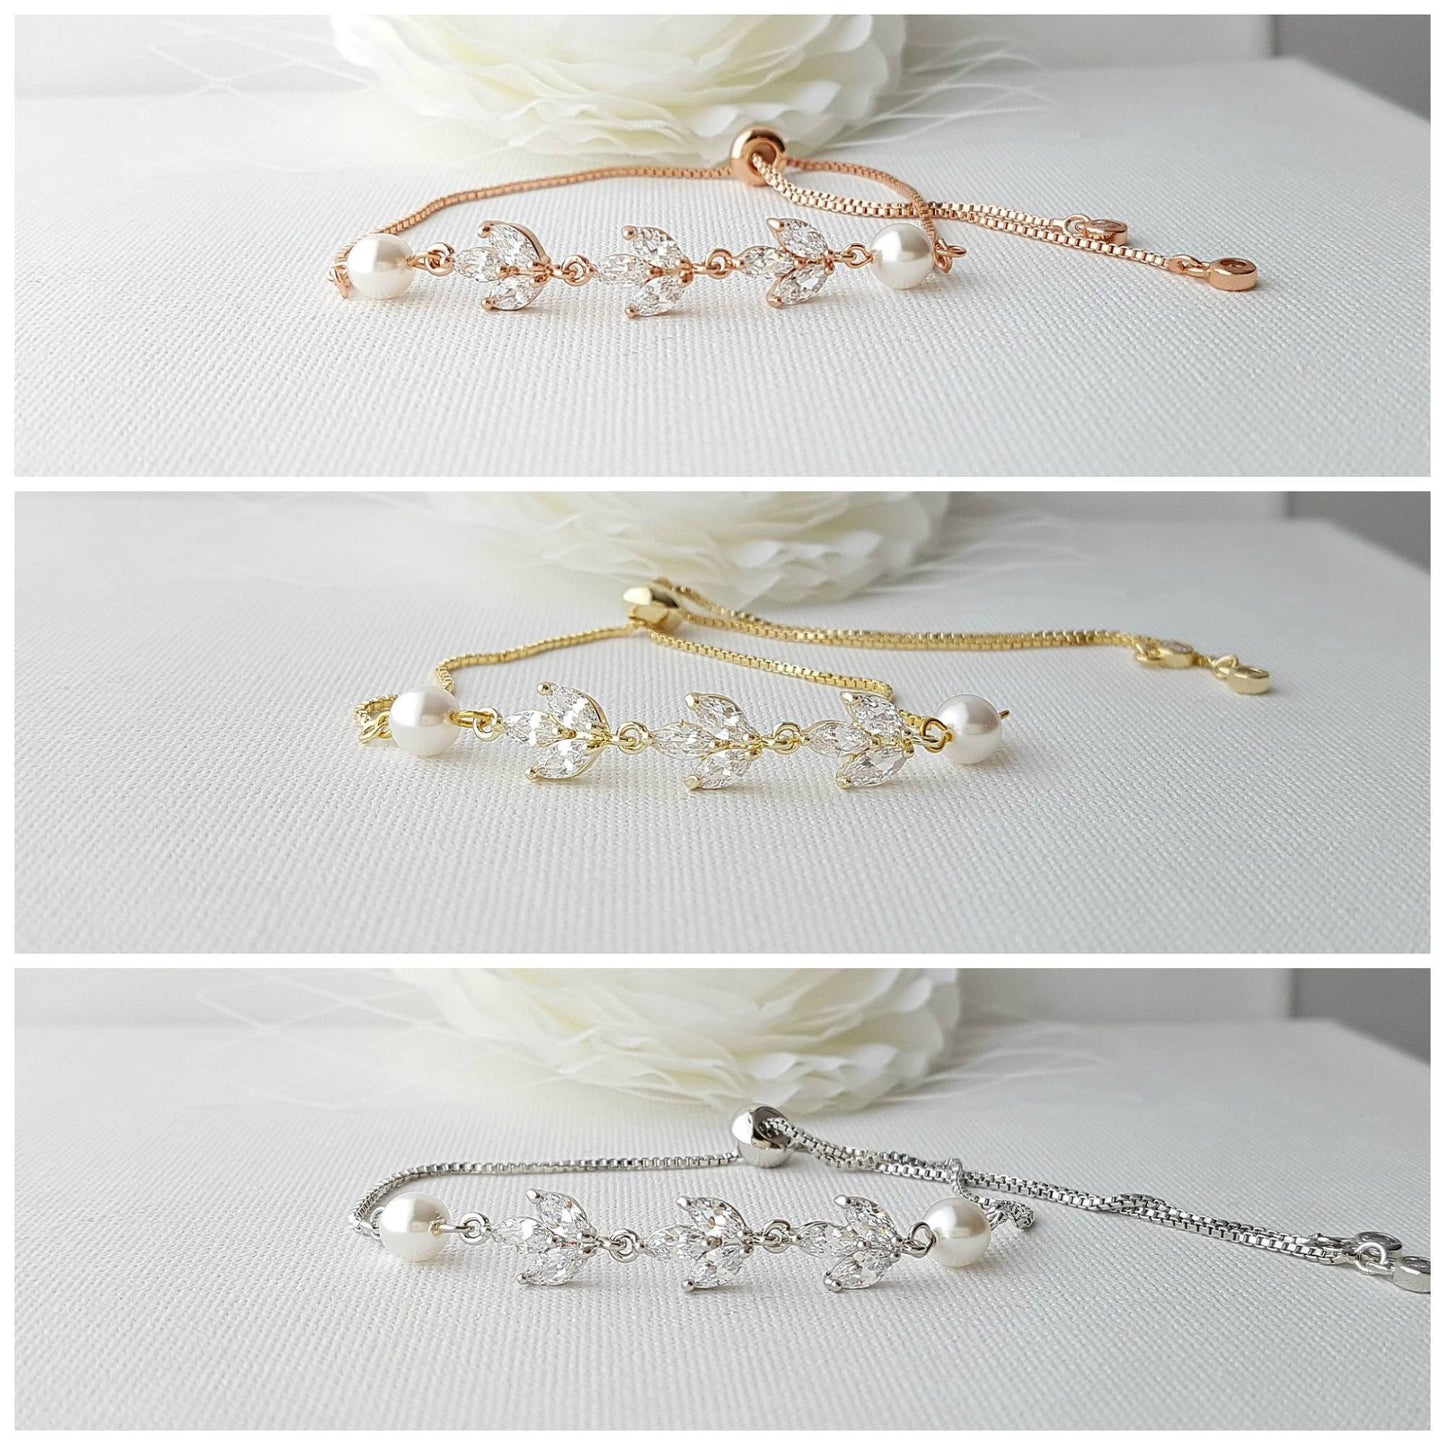 Dainty Bridal Bracelet with marquise crystal and pearl with adjustable slider clasp